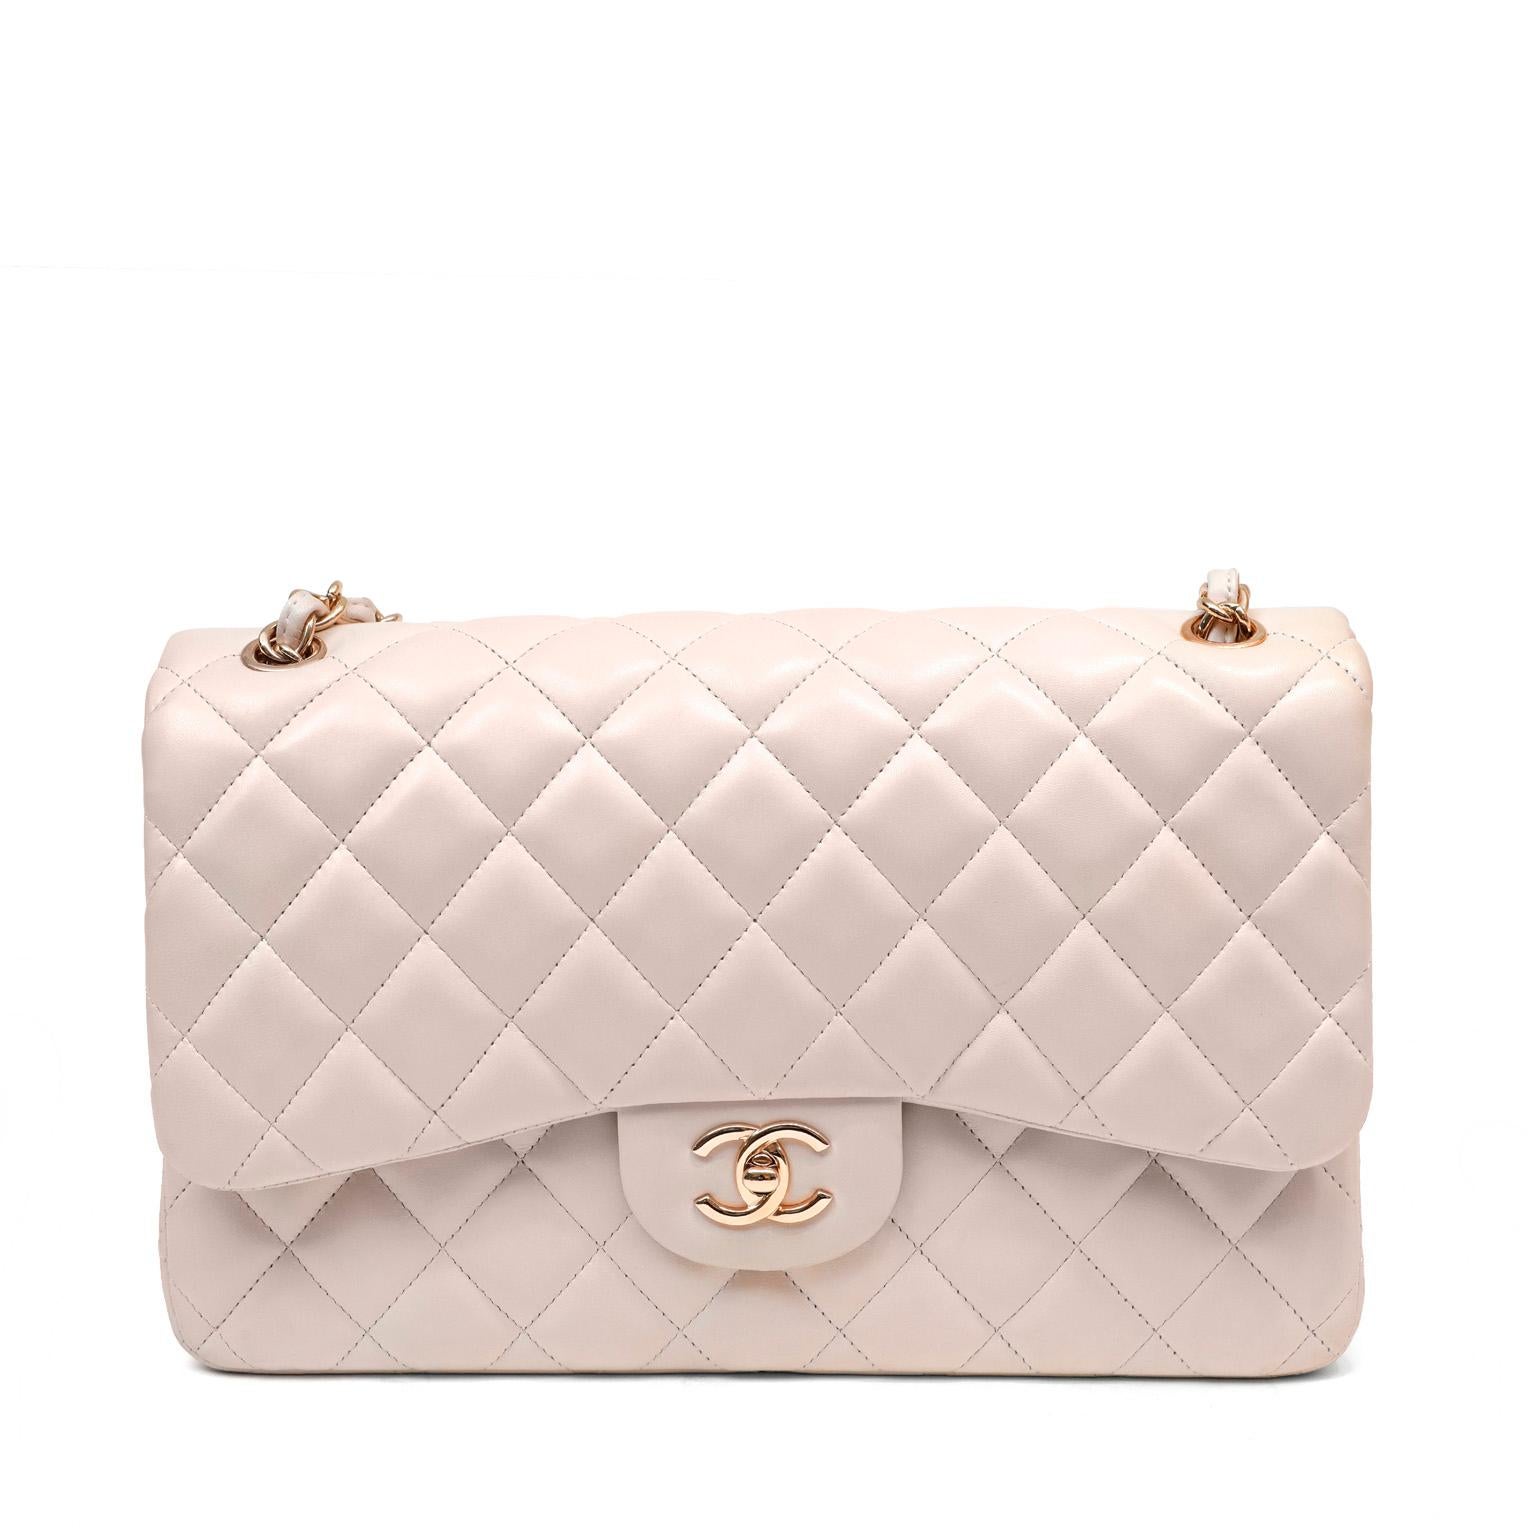 This authentic Chanel Light Beige Lambskin Jumbo Classic Flap is in pristine condition.  The highly sought-after Jumbo Classic is breathtaking in this feminine pairing of neutral light beige with rose gold hardware; rare and collectible.

Quilted